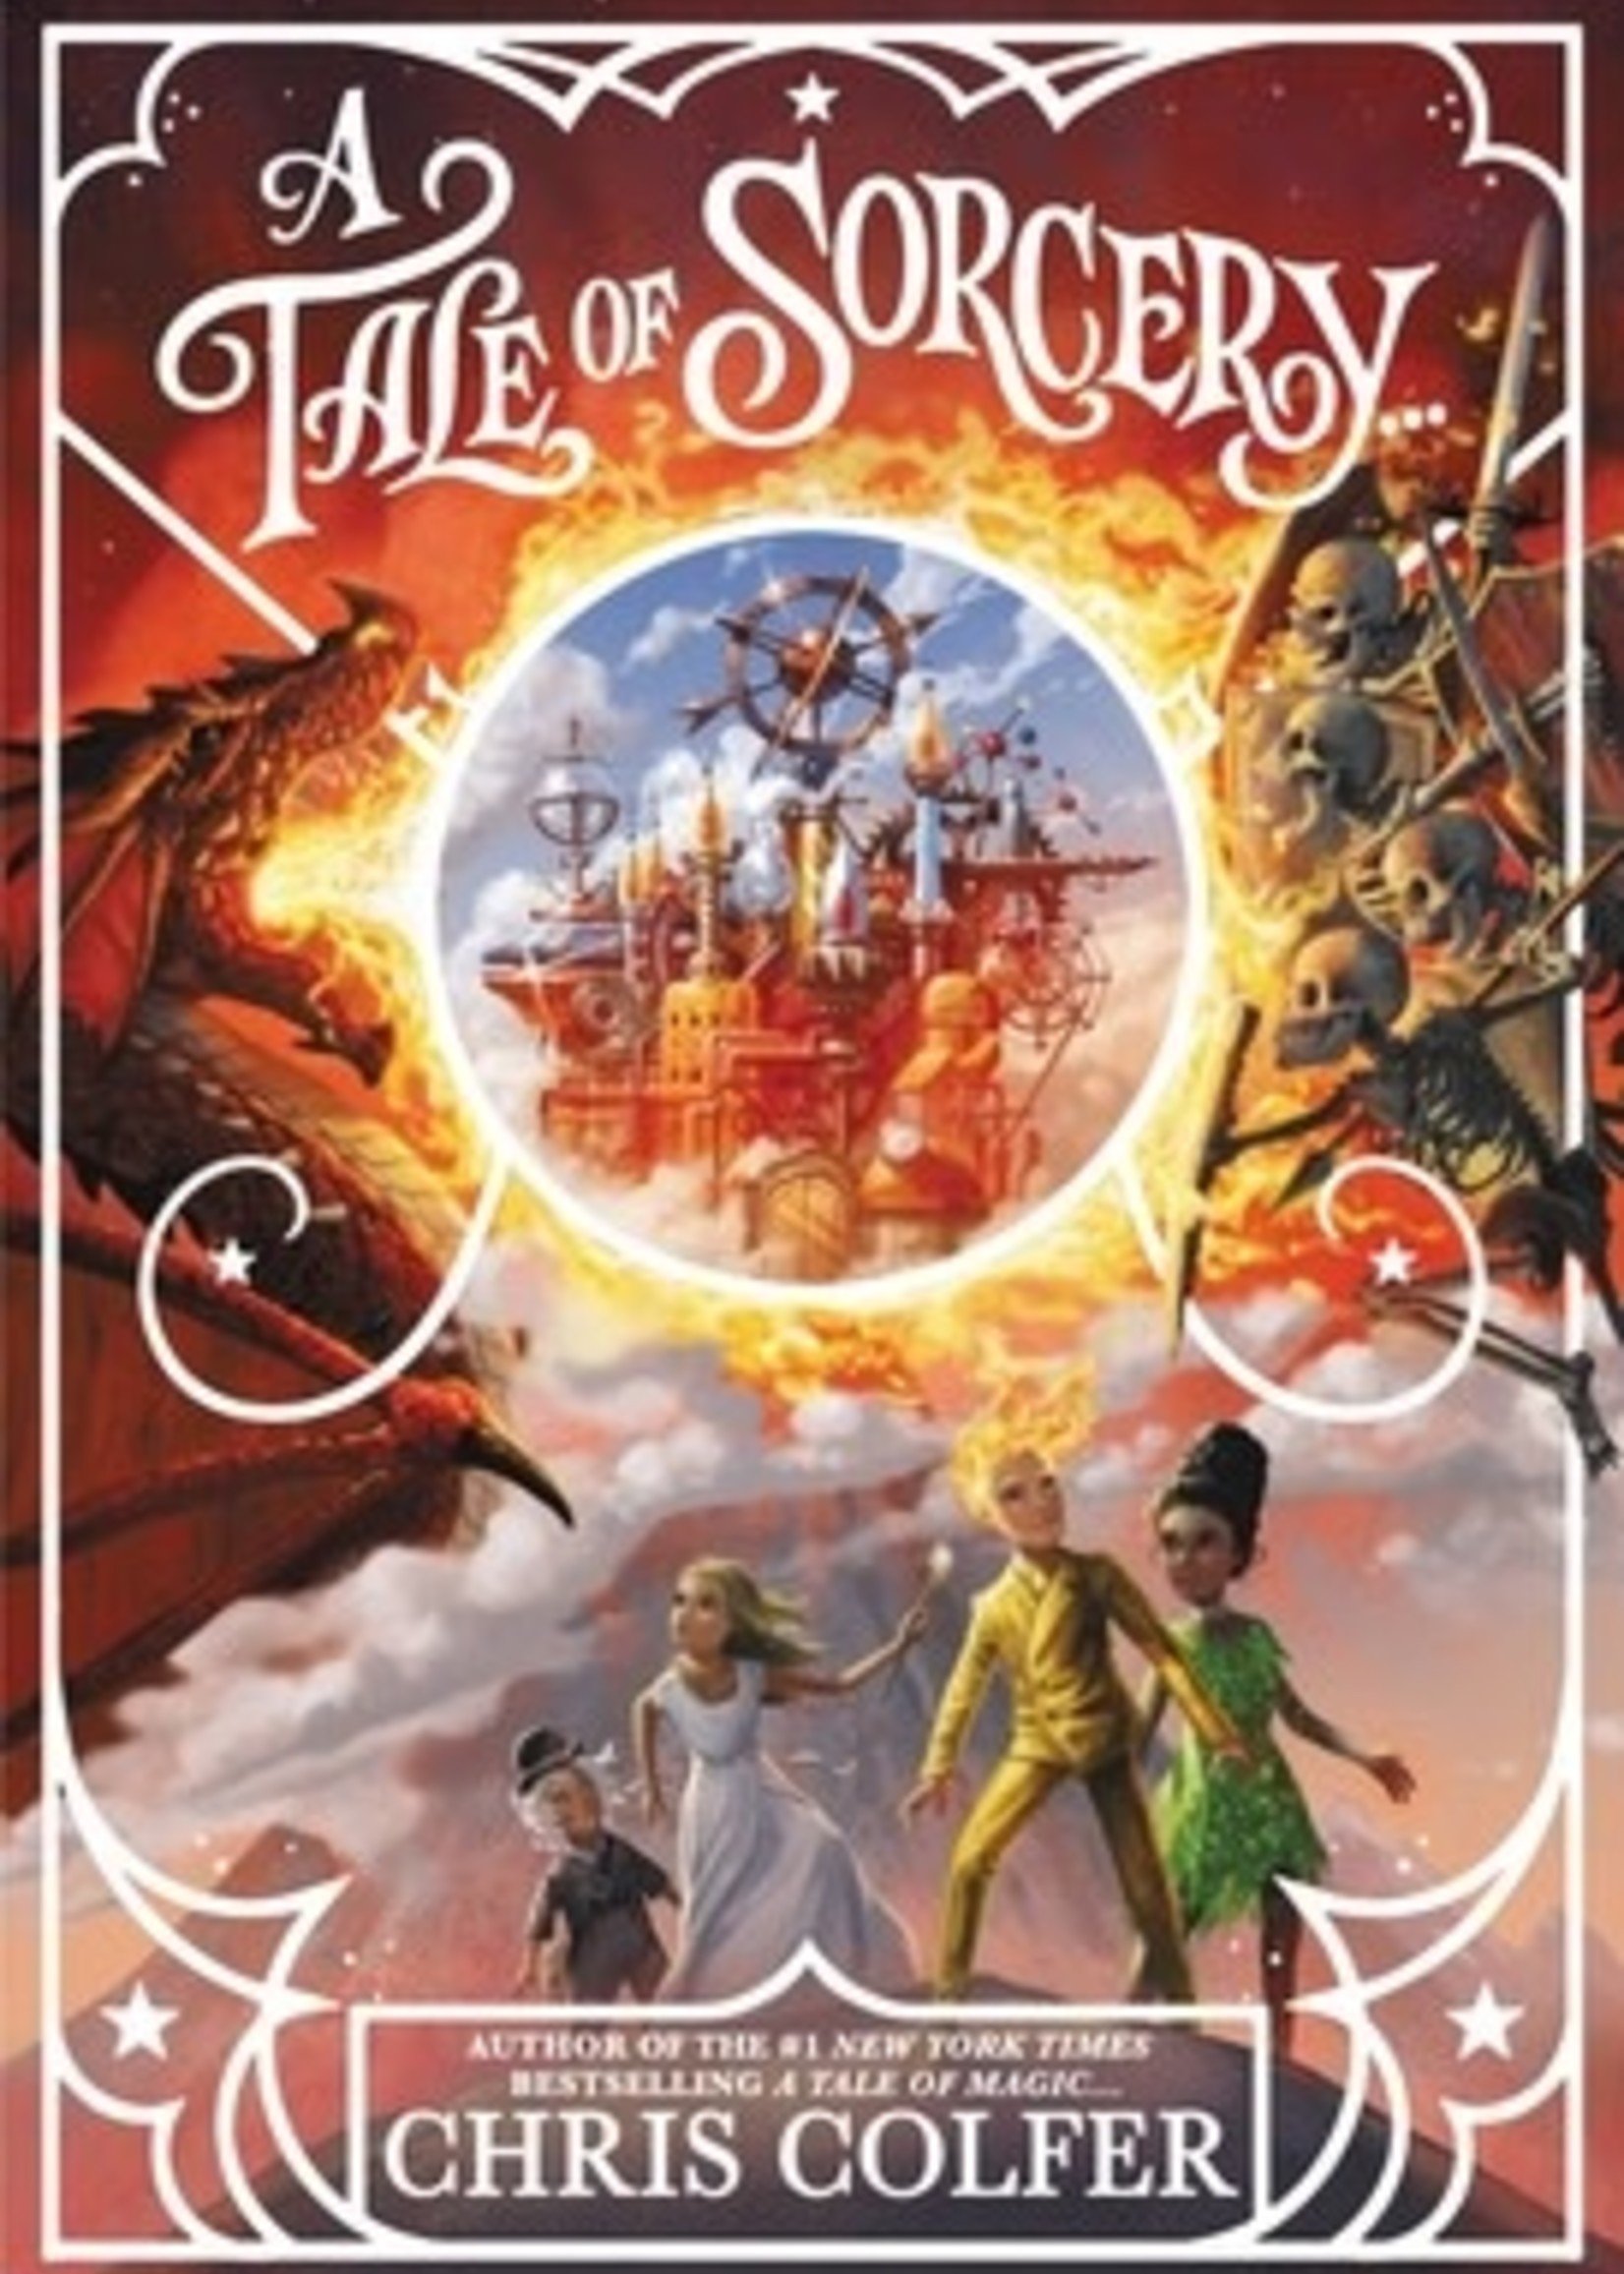 A Tale of Sorcery... (A Tale of Magic #3) by Chris Colfer